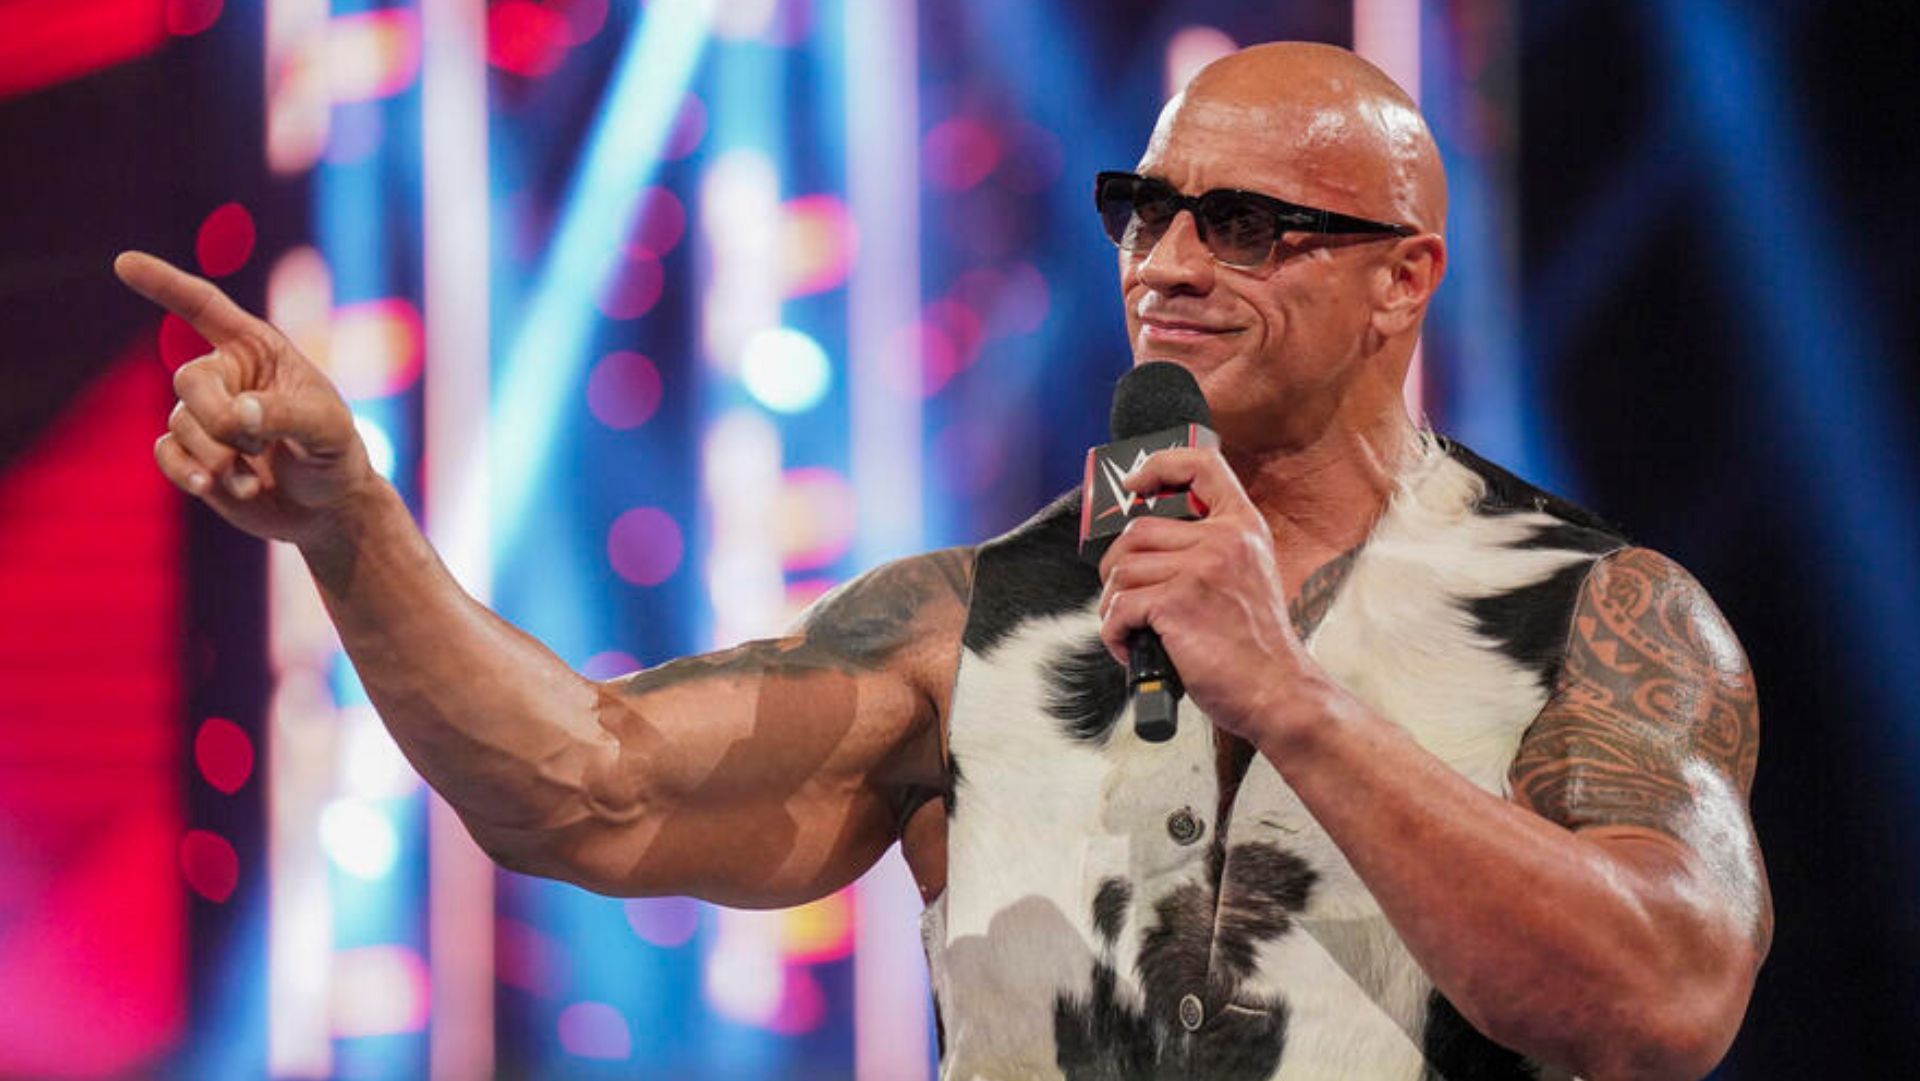 The Rock is shooting for 